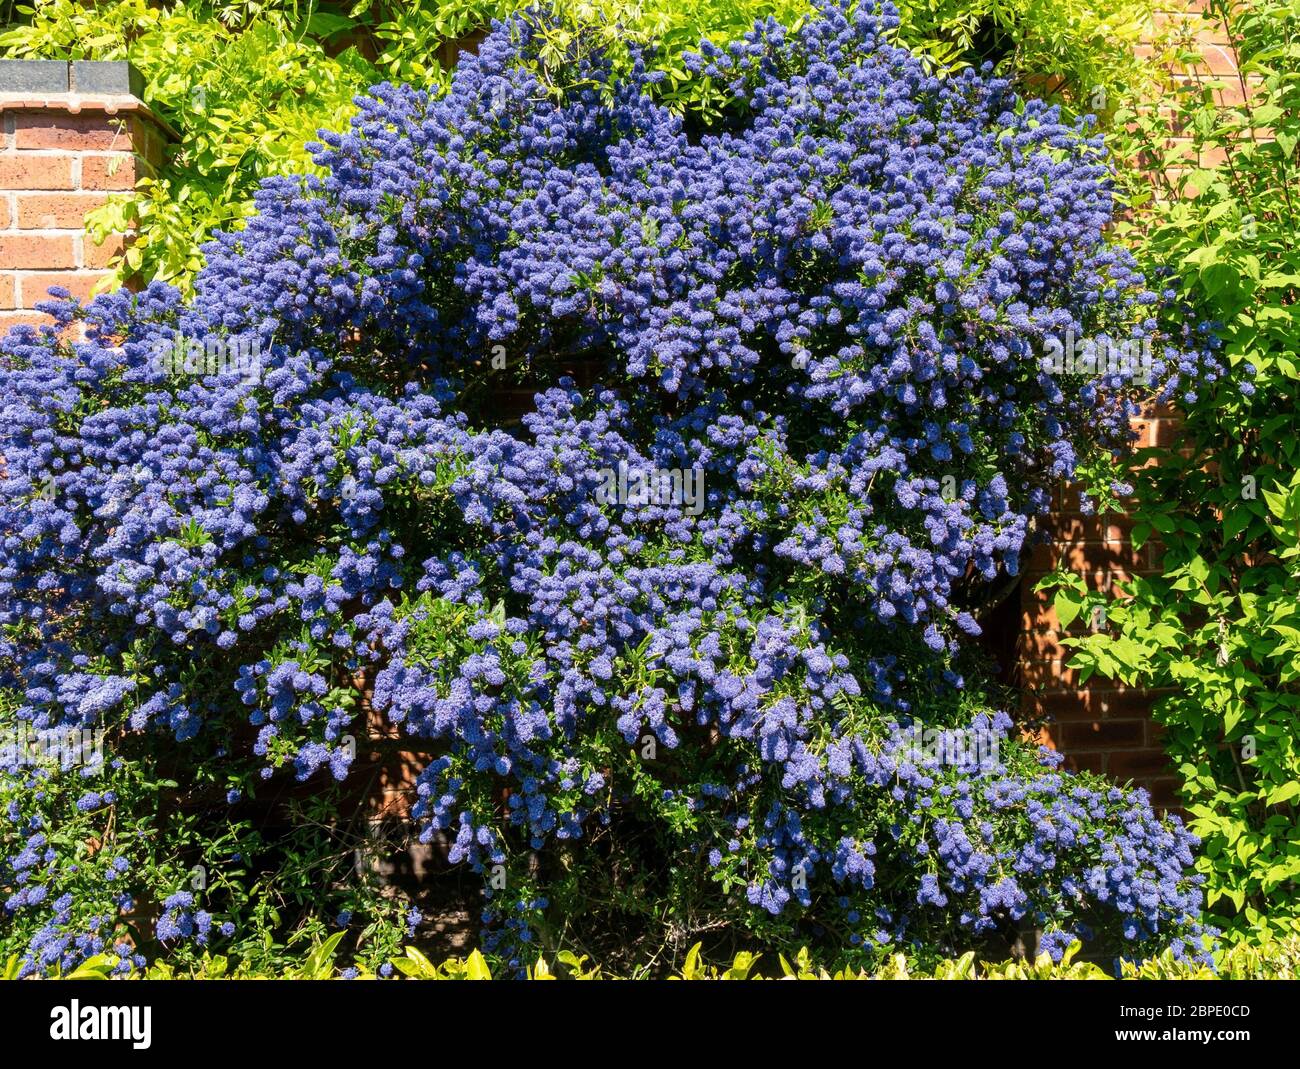 Ceanothus 'Puget Blue' Californian Lilac bush covered in deep blue blossom flowers in May, Leicestershire, England, UK Stock Photo